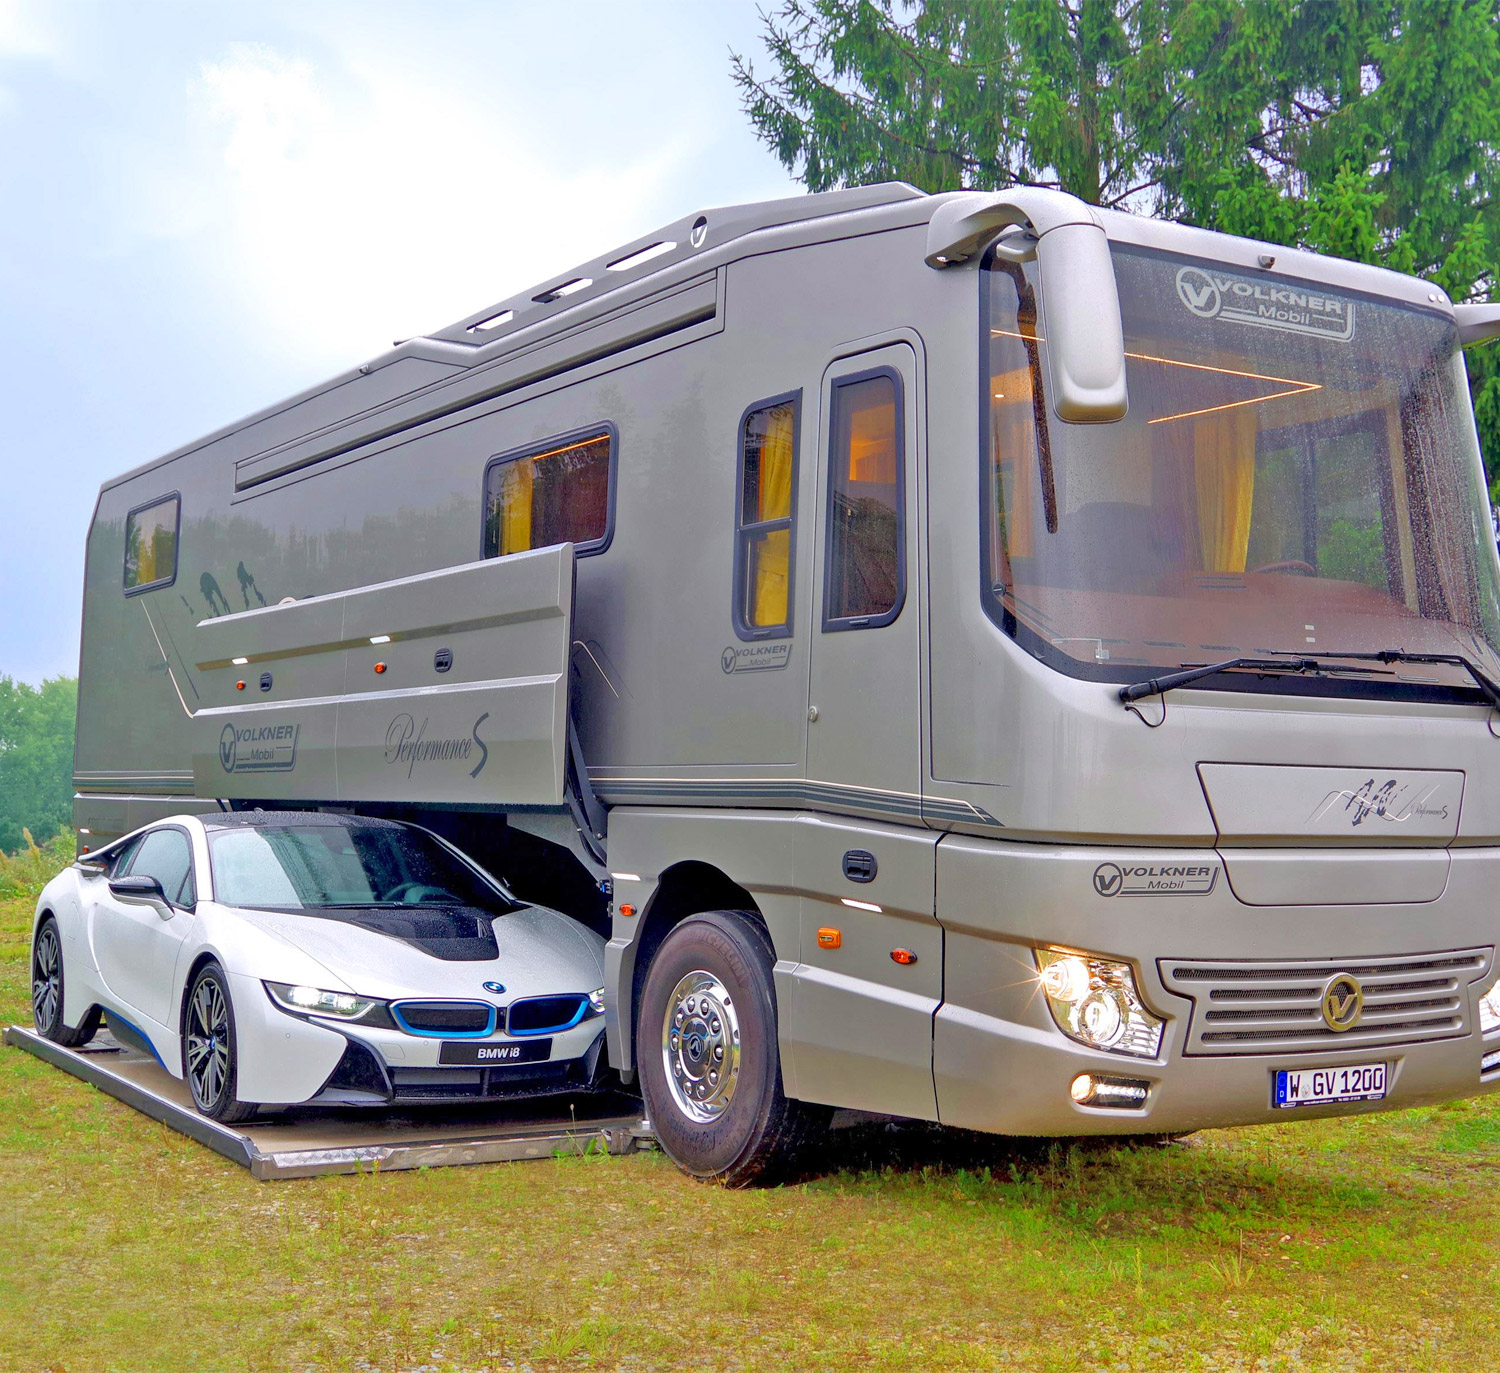 This Million Luxury Motorhome Has Its Own Garage To Hold A Car | My XXX ...